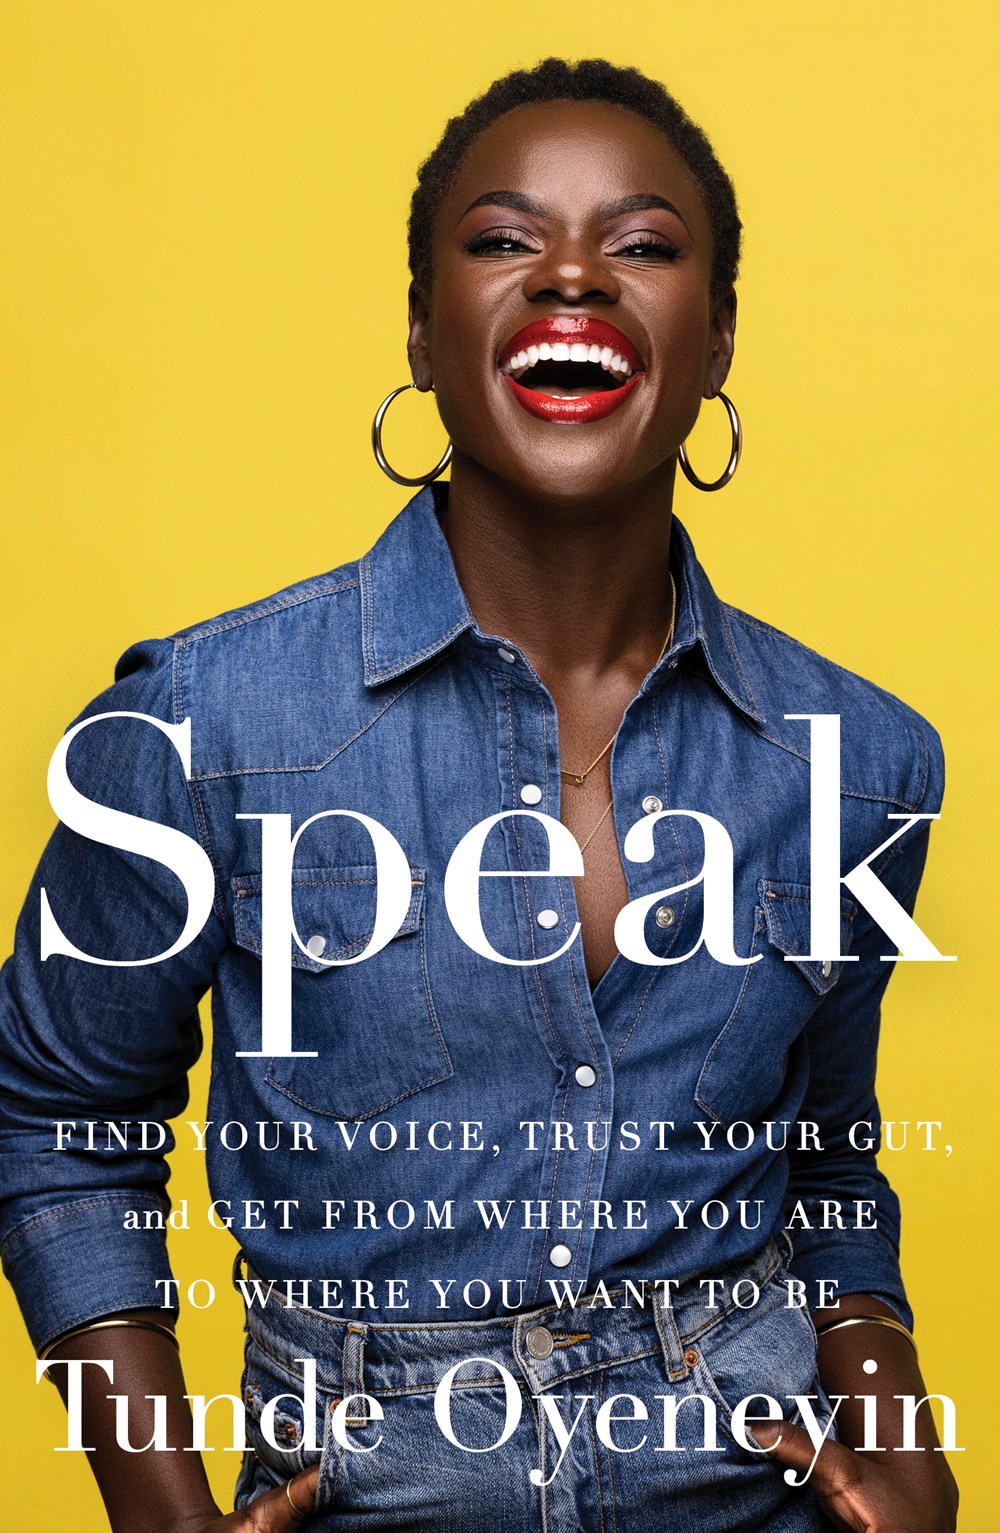 Speak Find Your Voice, Trust Your Gut, and Get from Where You Are to Where You Want to Be